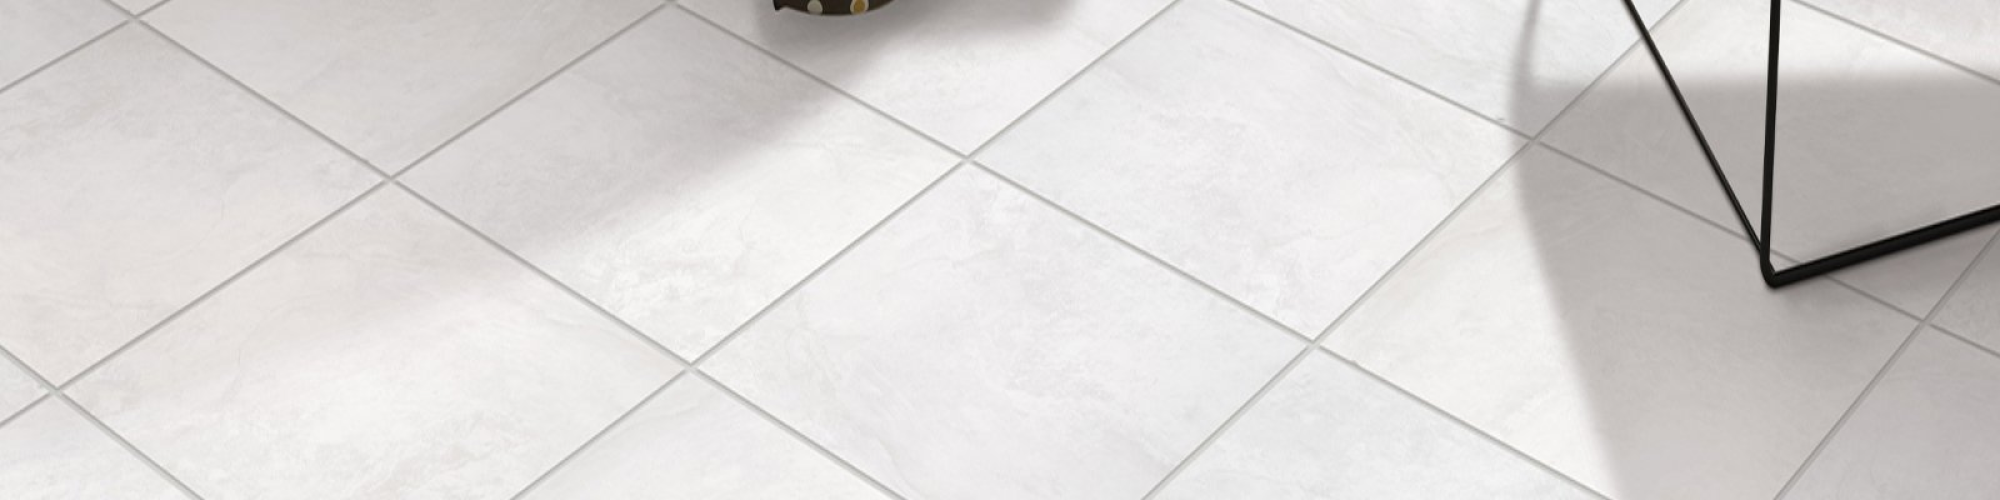 Learn more about flooring tips, tricks and ideas from Pioneer Floor Coverings